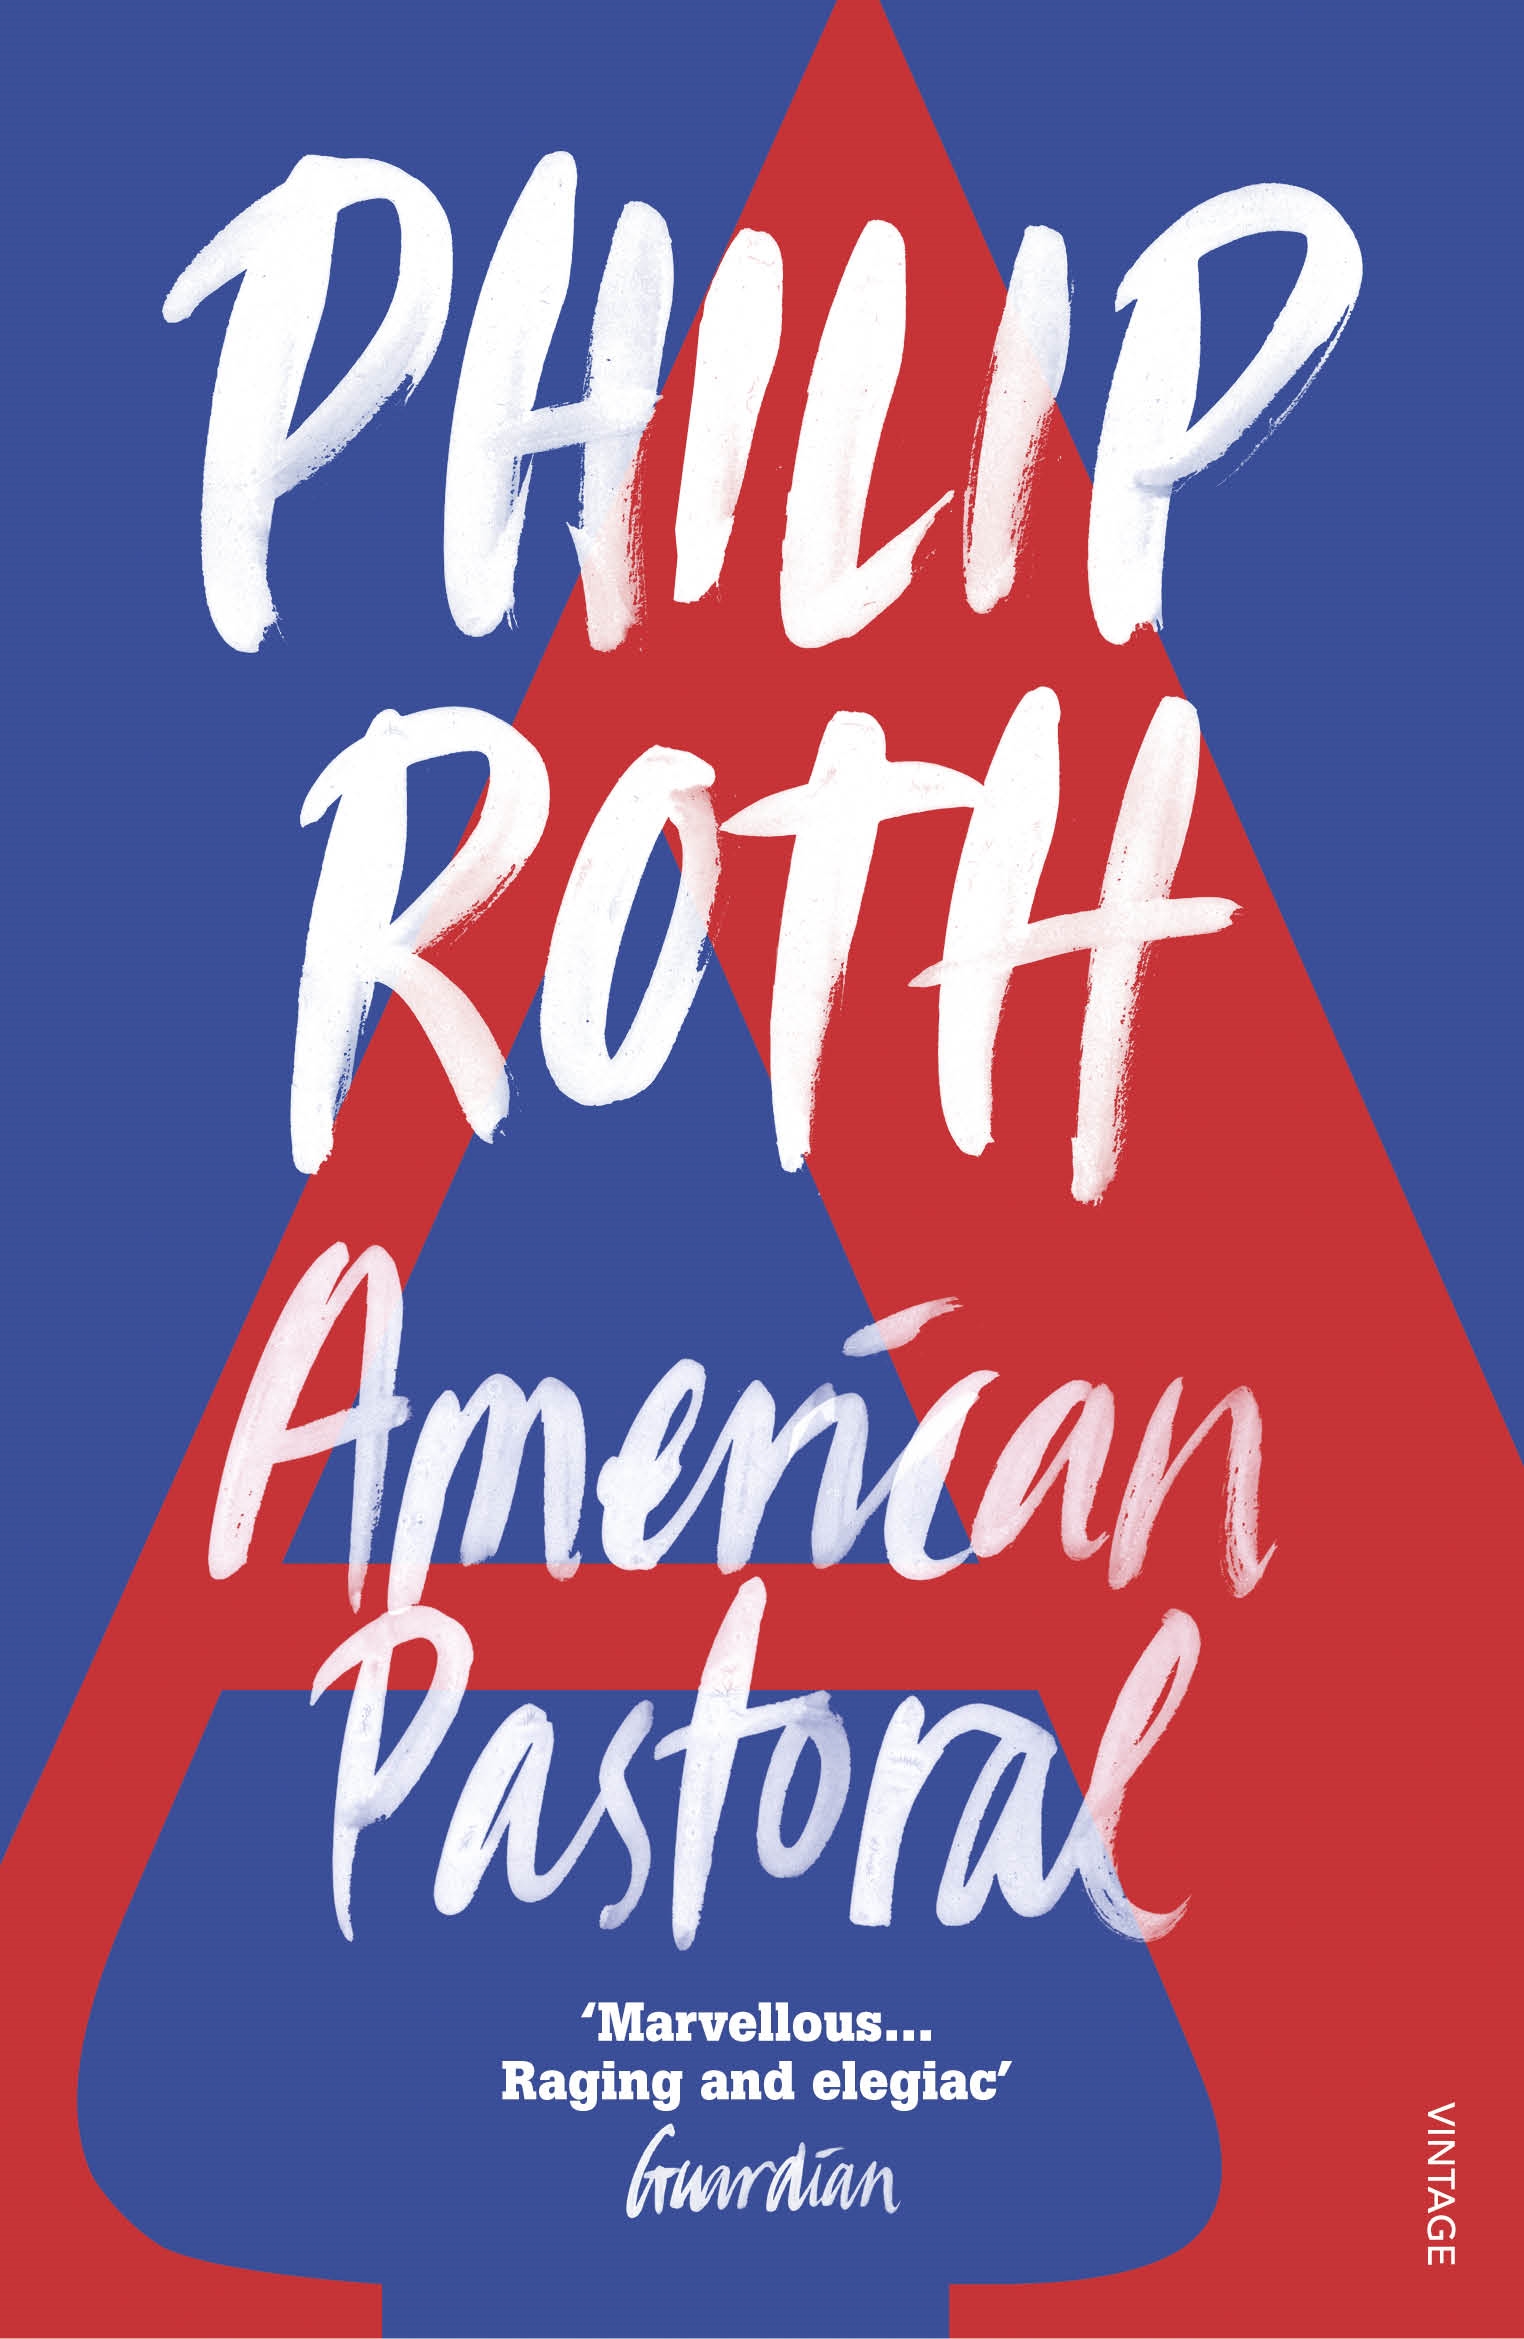 american pastoral book review new yorker